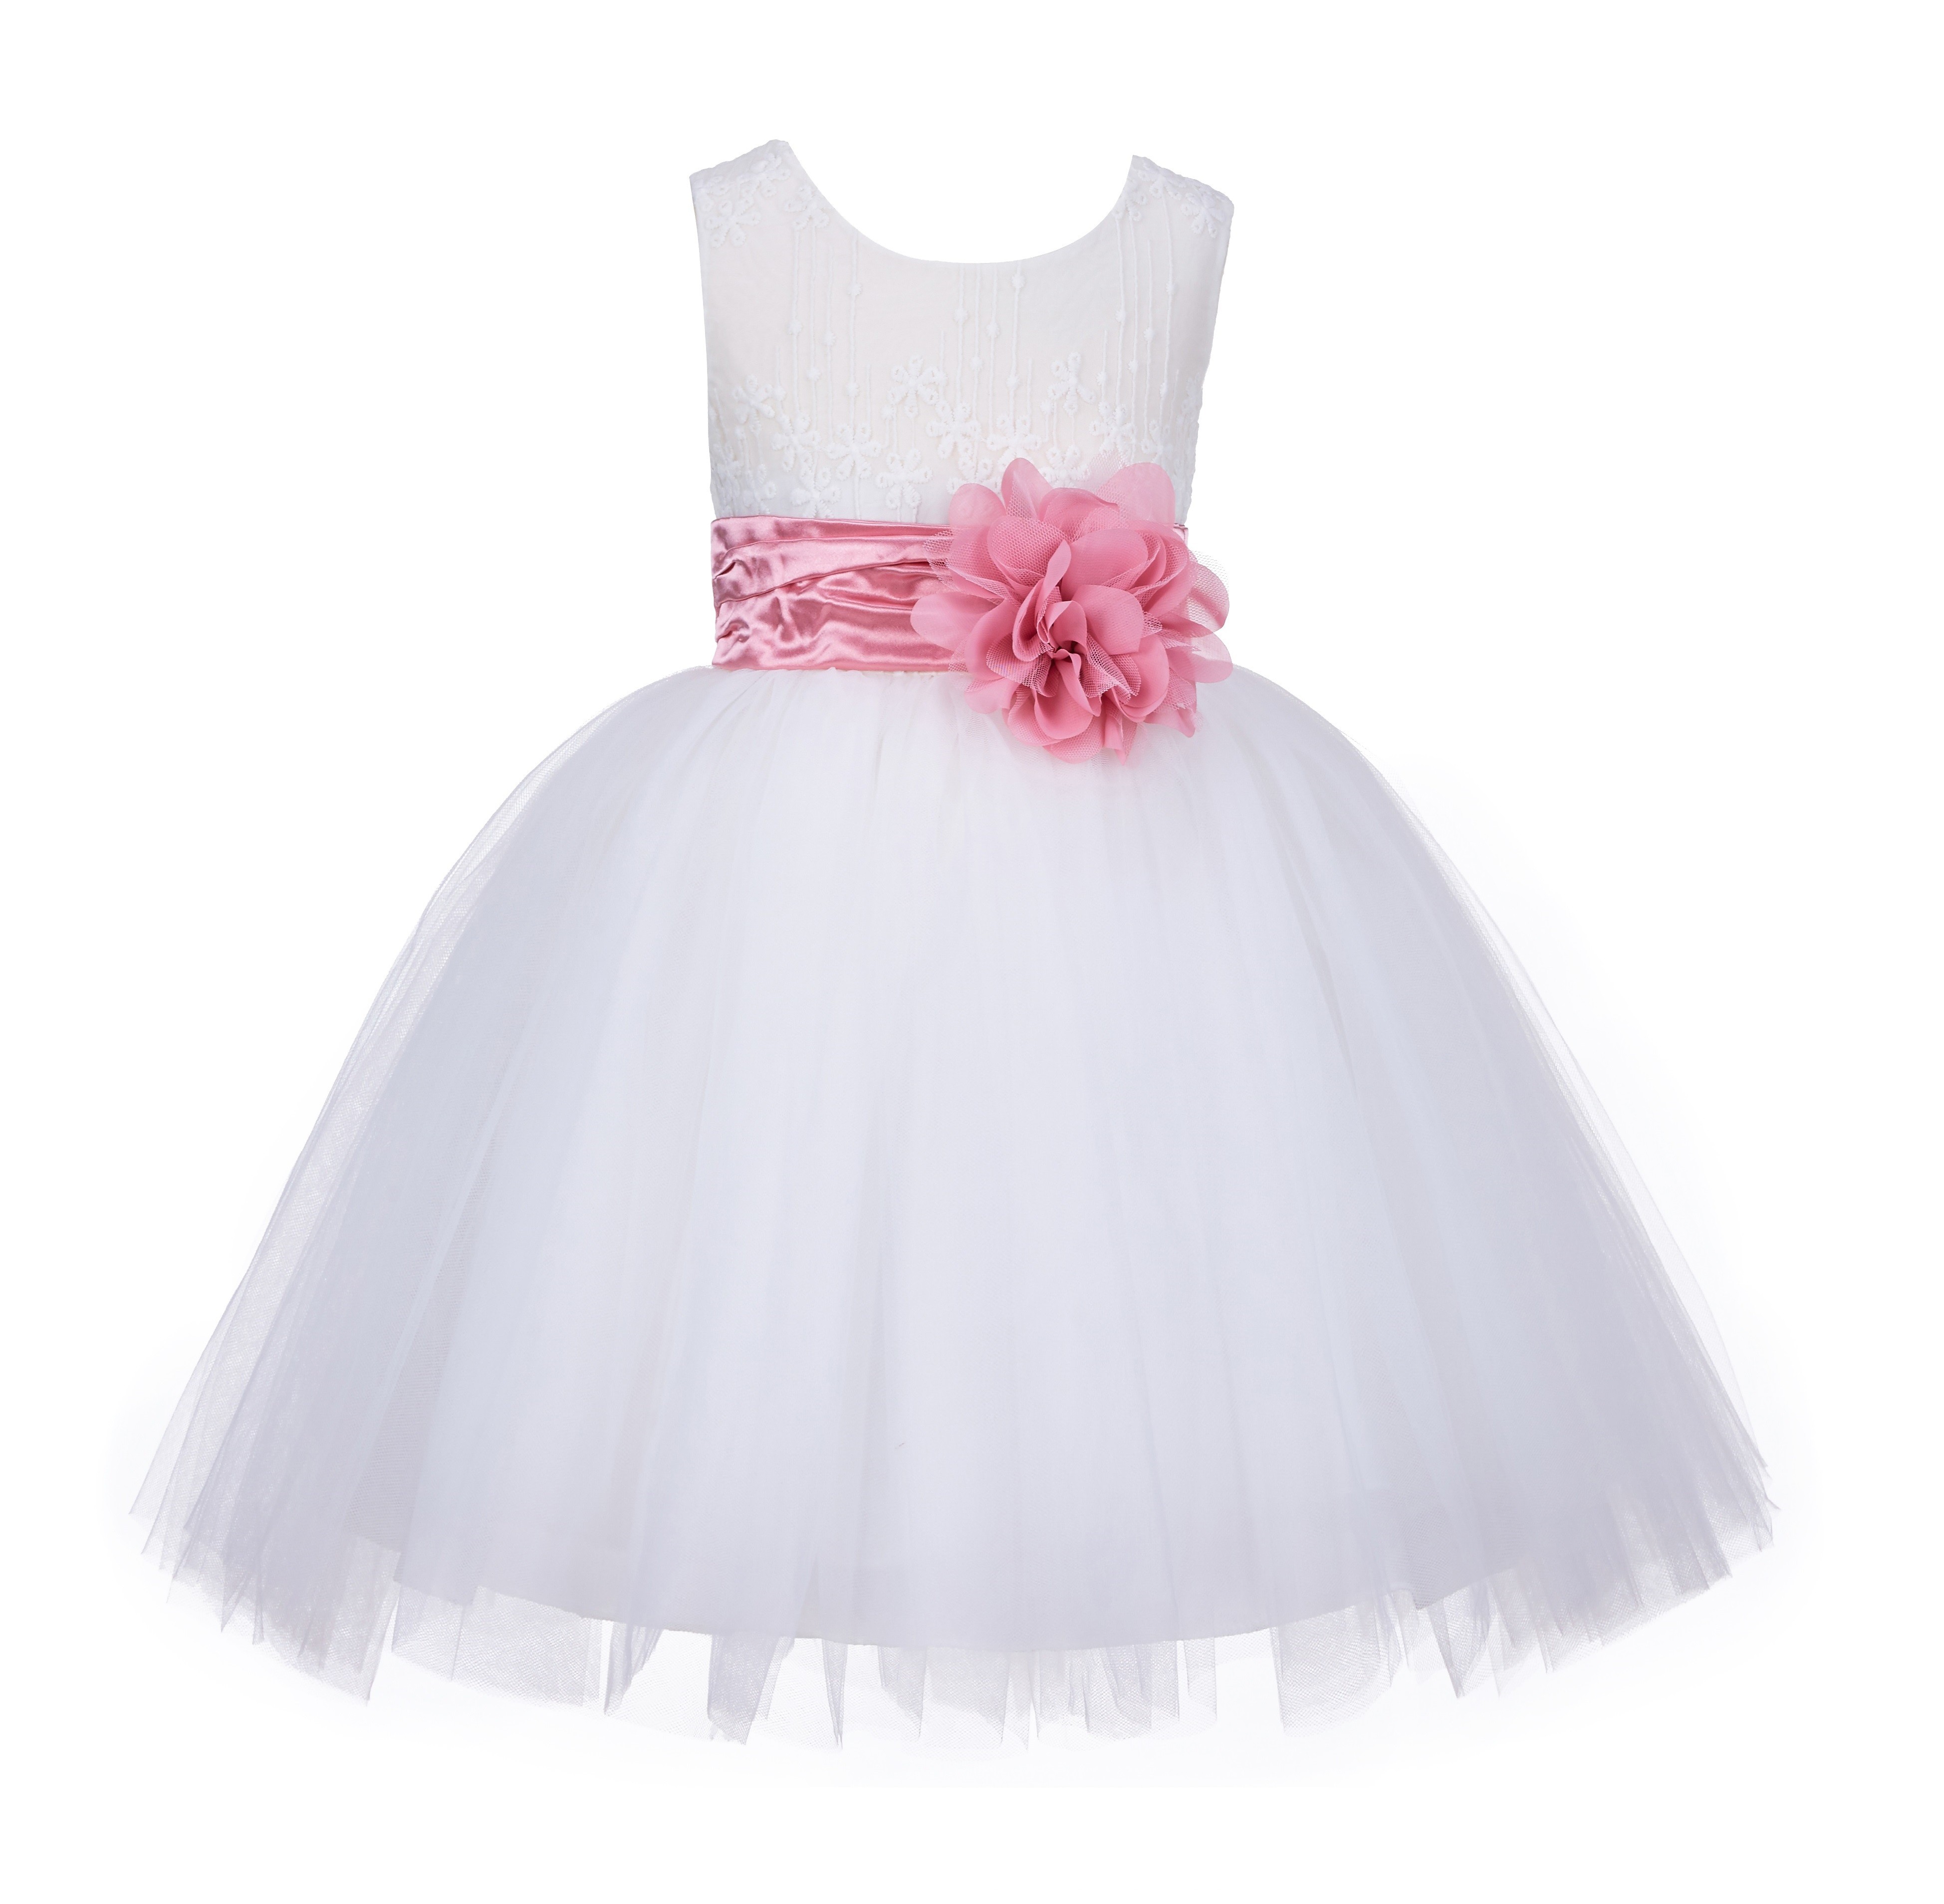 Ivory/Dusty Rose Lace Embroidery Tulle Flower Girl Dress Pageant 118